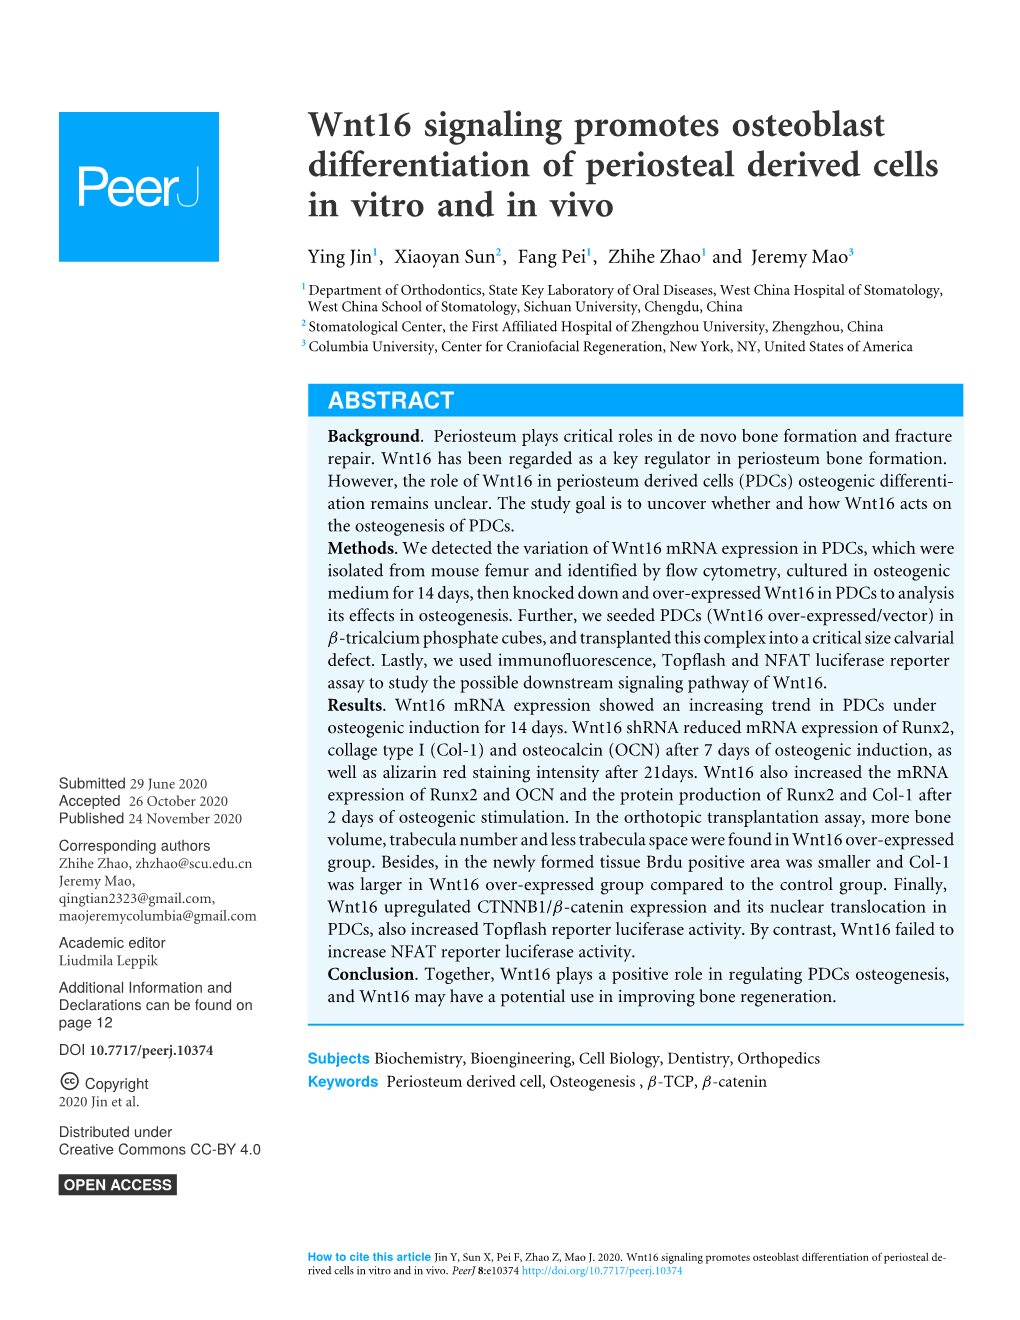 Wnt16 Signaling Promotes Osteoblast Differentiation of Periosteal Derived Cells in Vitro and in Vivo